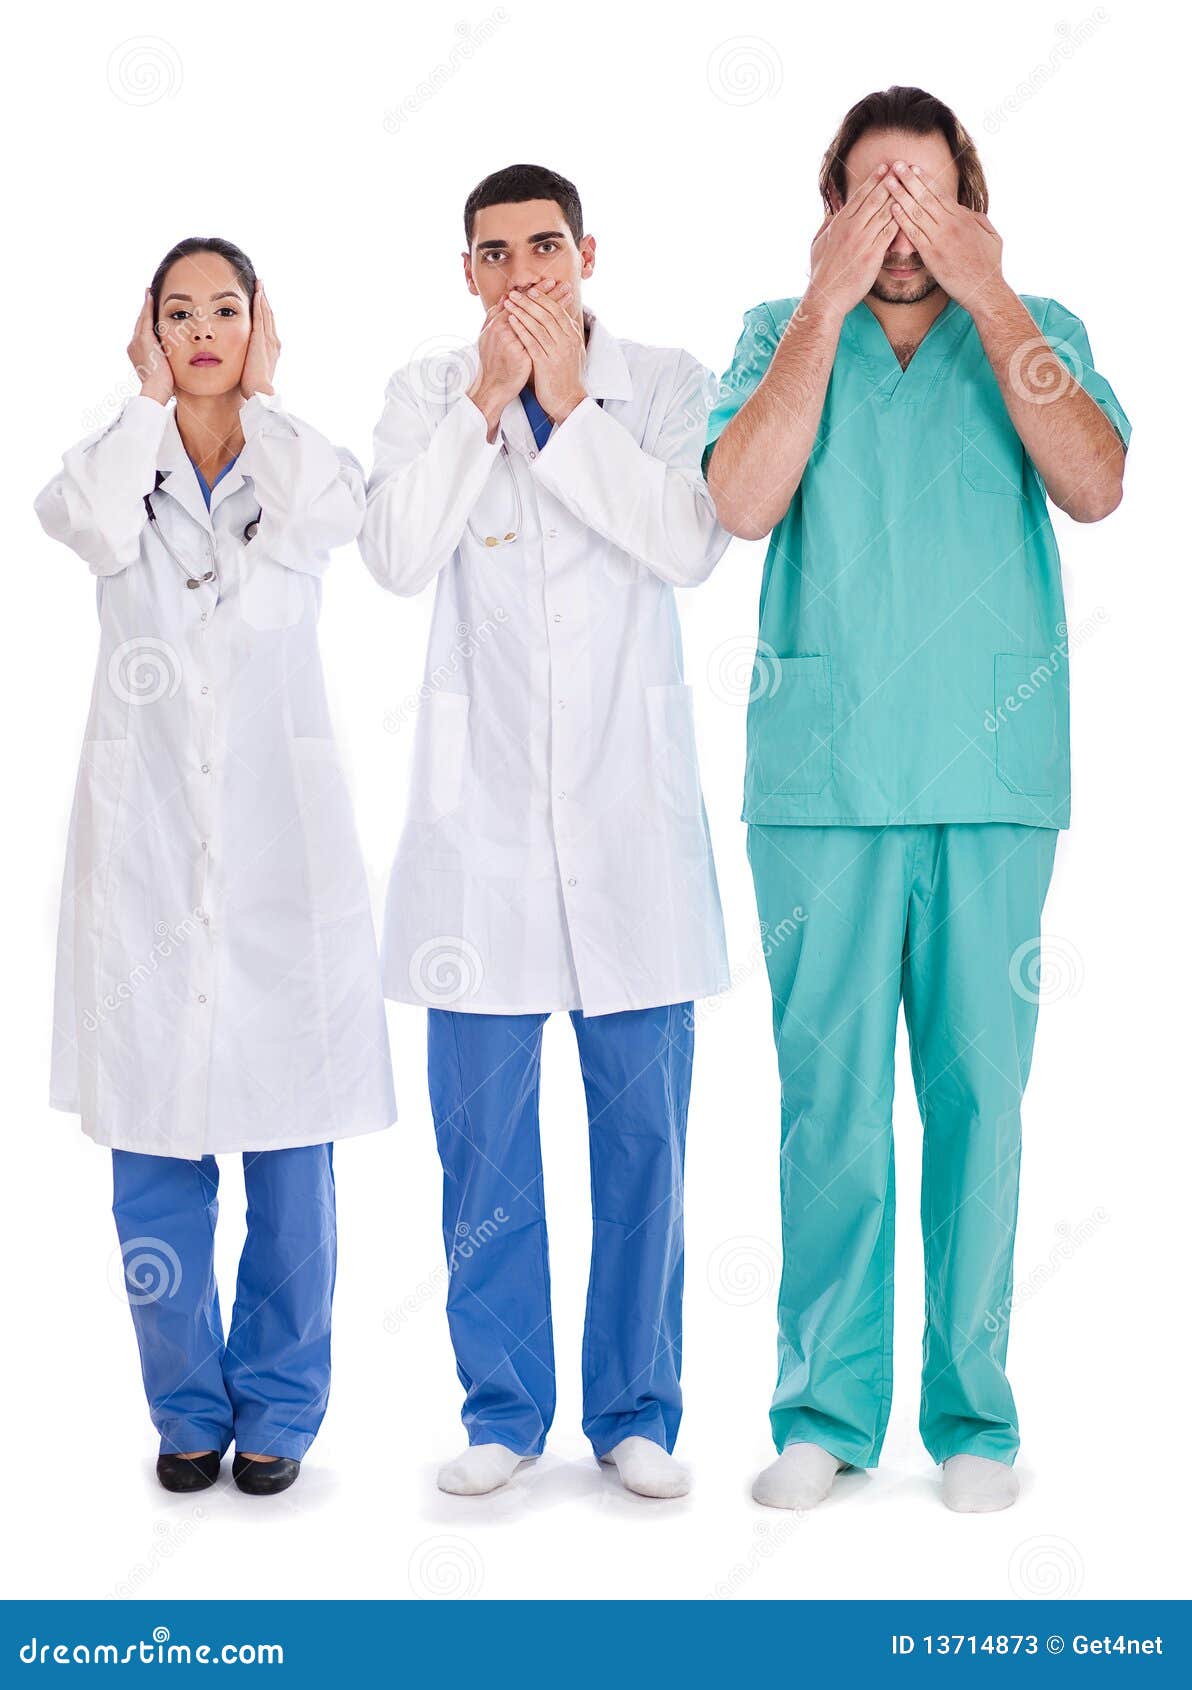 3 doctors don't see, don't speak and don't hear